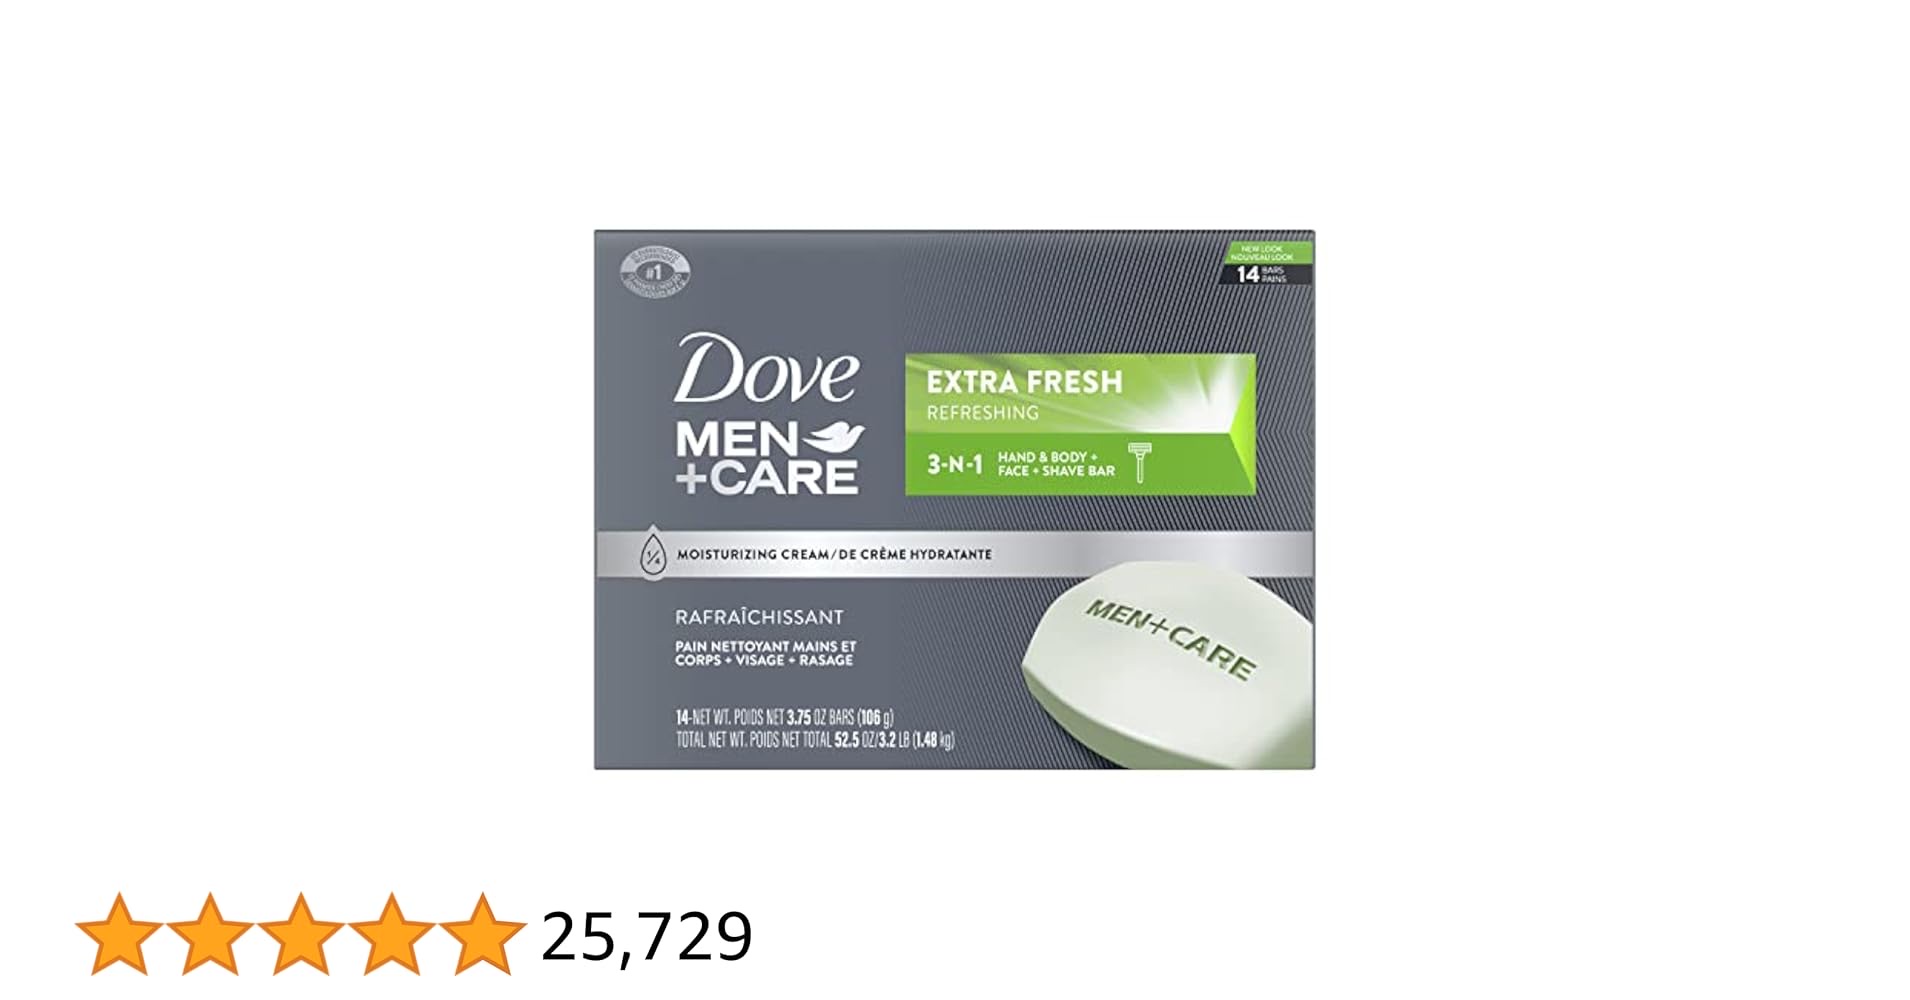 DOVE MEN + CARE Bar 3 in 1 Cleanser for Body, Face, and Shaving to Clean and Hydrate Skin Extra Fresh Body and Facial Cleanser More Moisturizing Than Bar Soap 3.75 oz, 14 Count (Pack of 1)